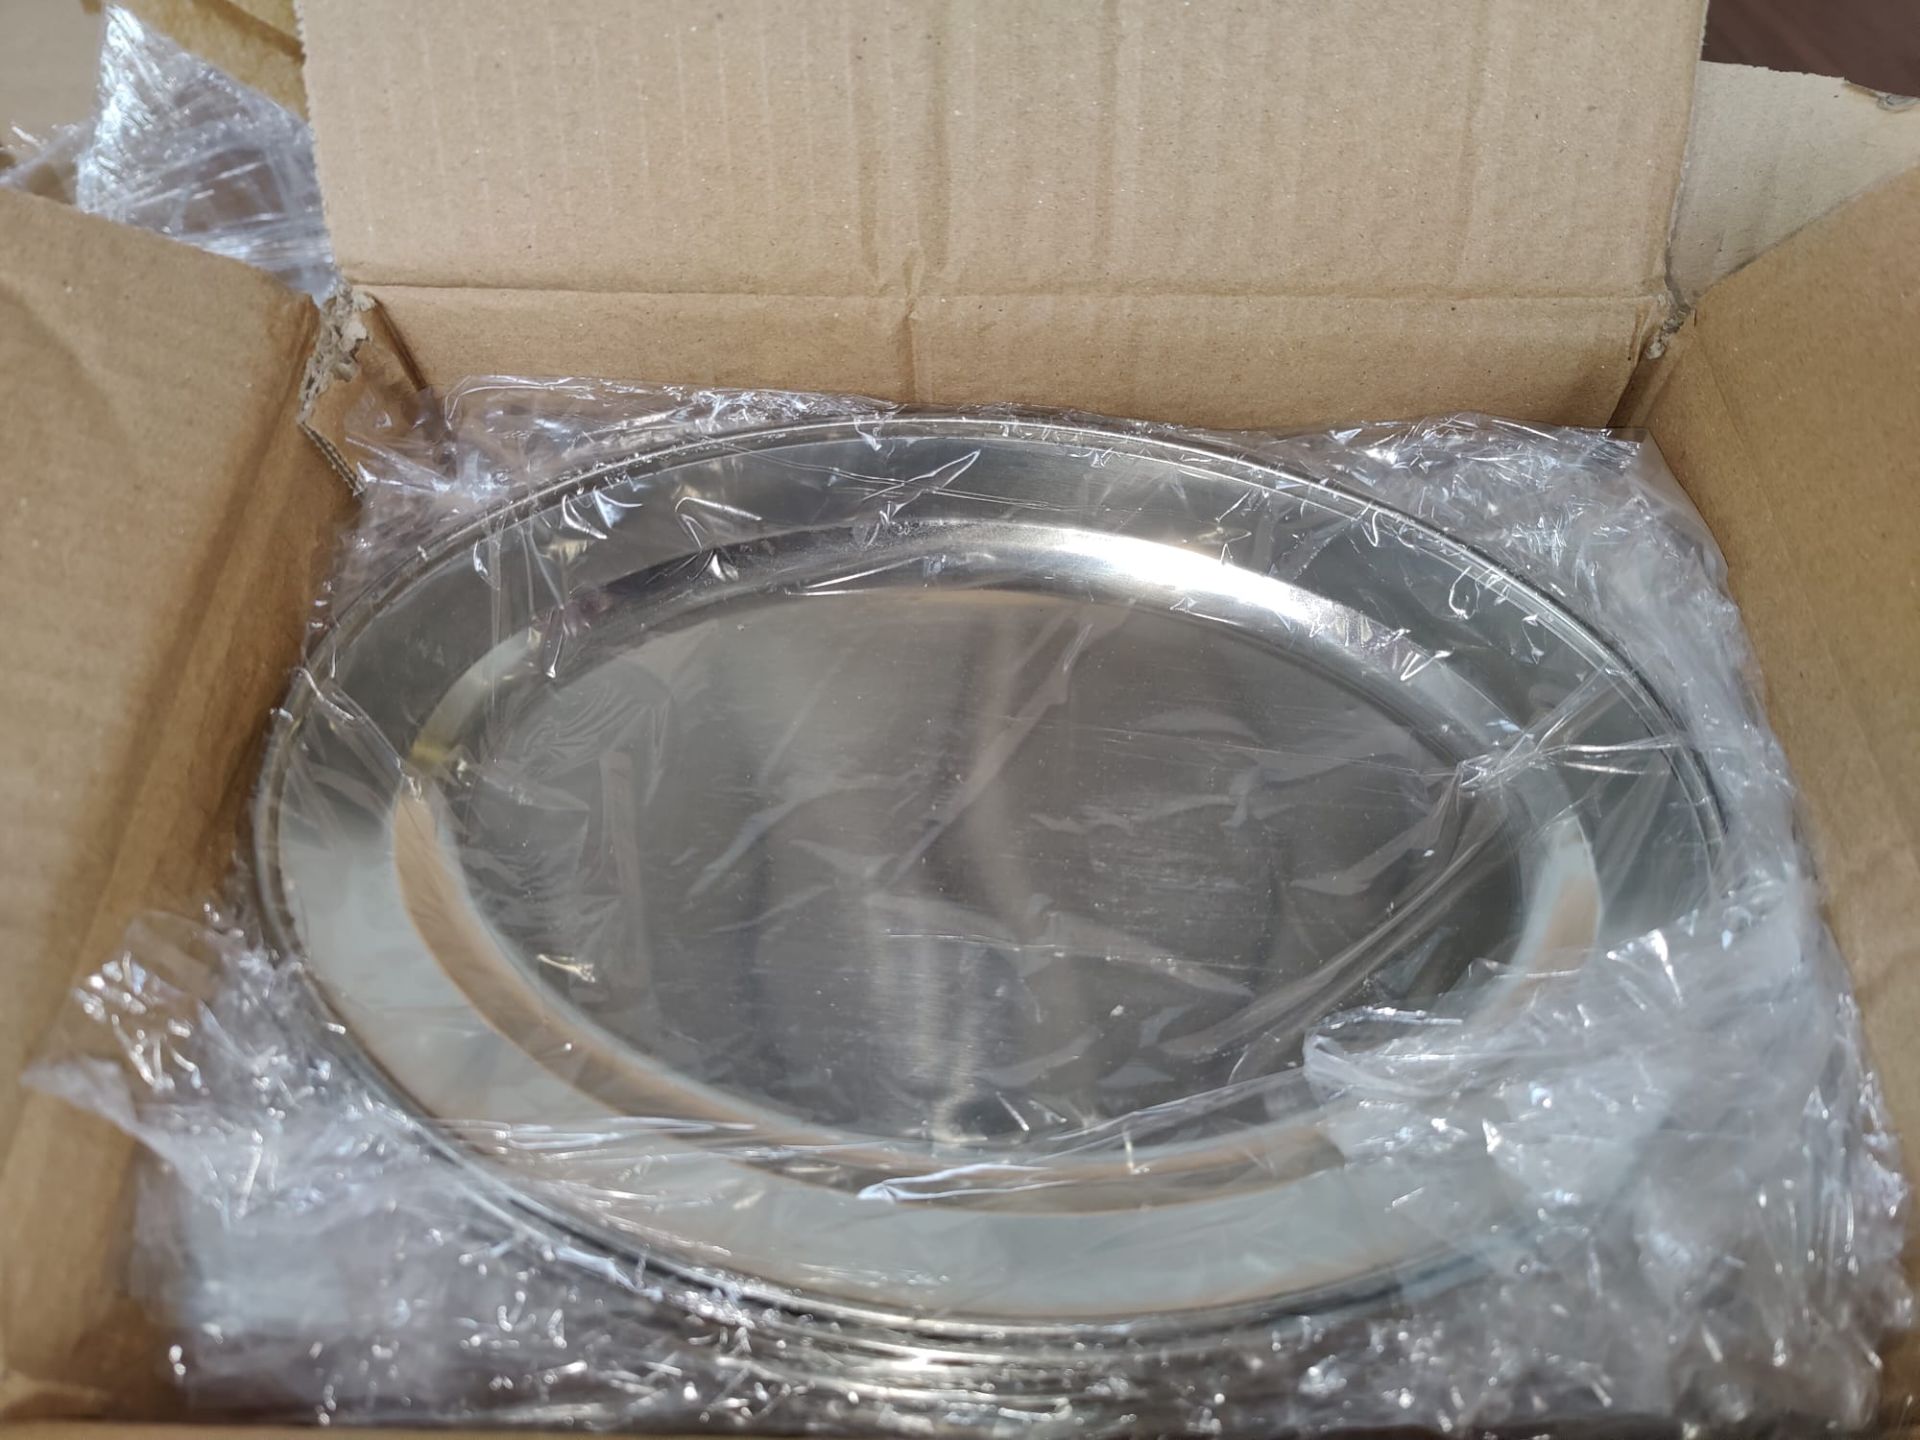 18 x Stainless Steel Small Oval Service Trays - Size: 255mm x 180mm - Brand New Boxed Stock RRP £90 - Image 8 of 8